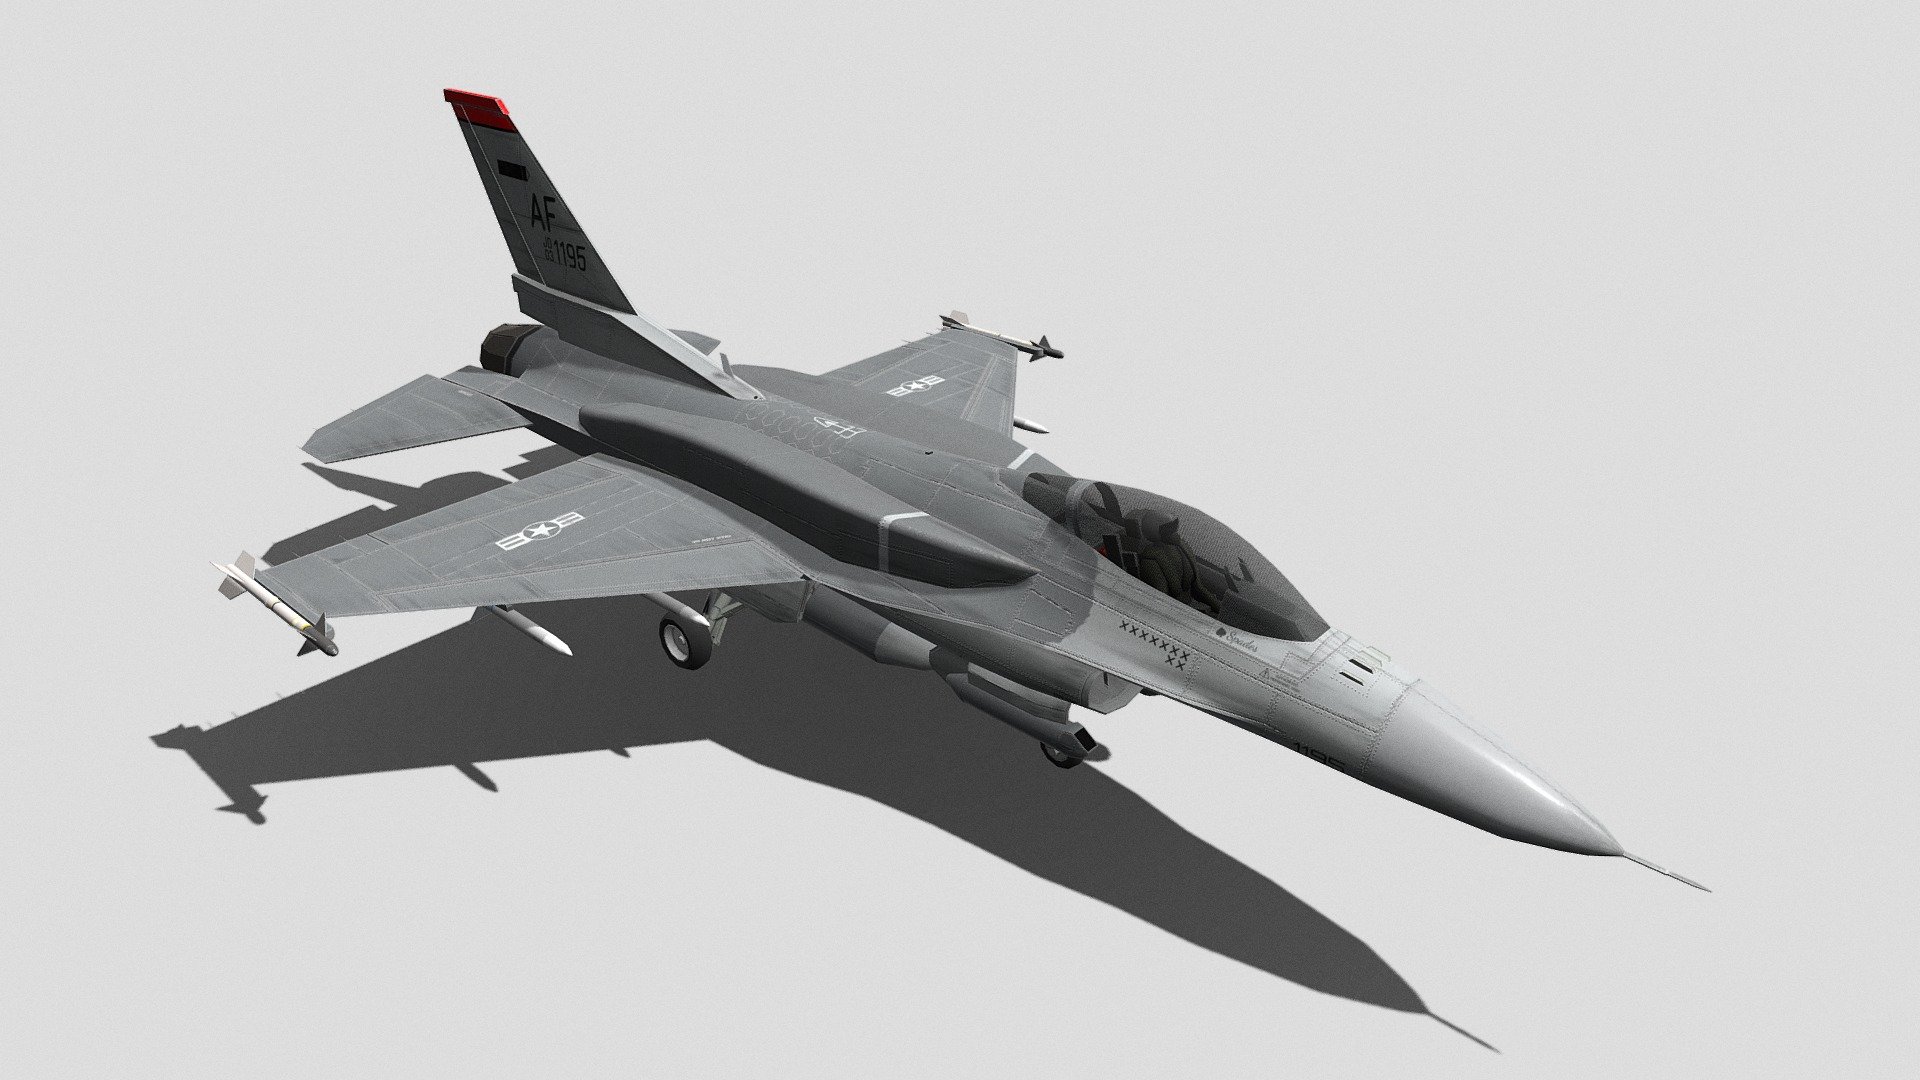 Fully Textured and Rigged F-16 Block 70 in Blender! download the .blend on my Patreon https://patreon.com/JacobDesigns - F-16 Block 70 (Fully Rigged) - 3D model by Jacobdesigns 3d model